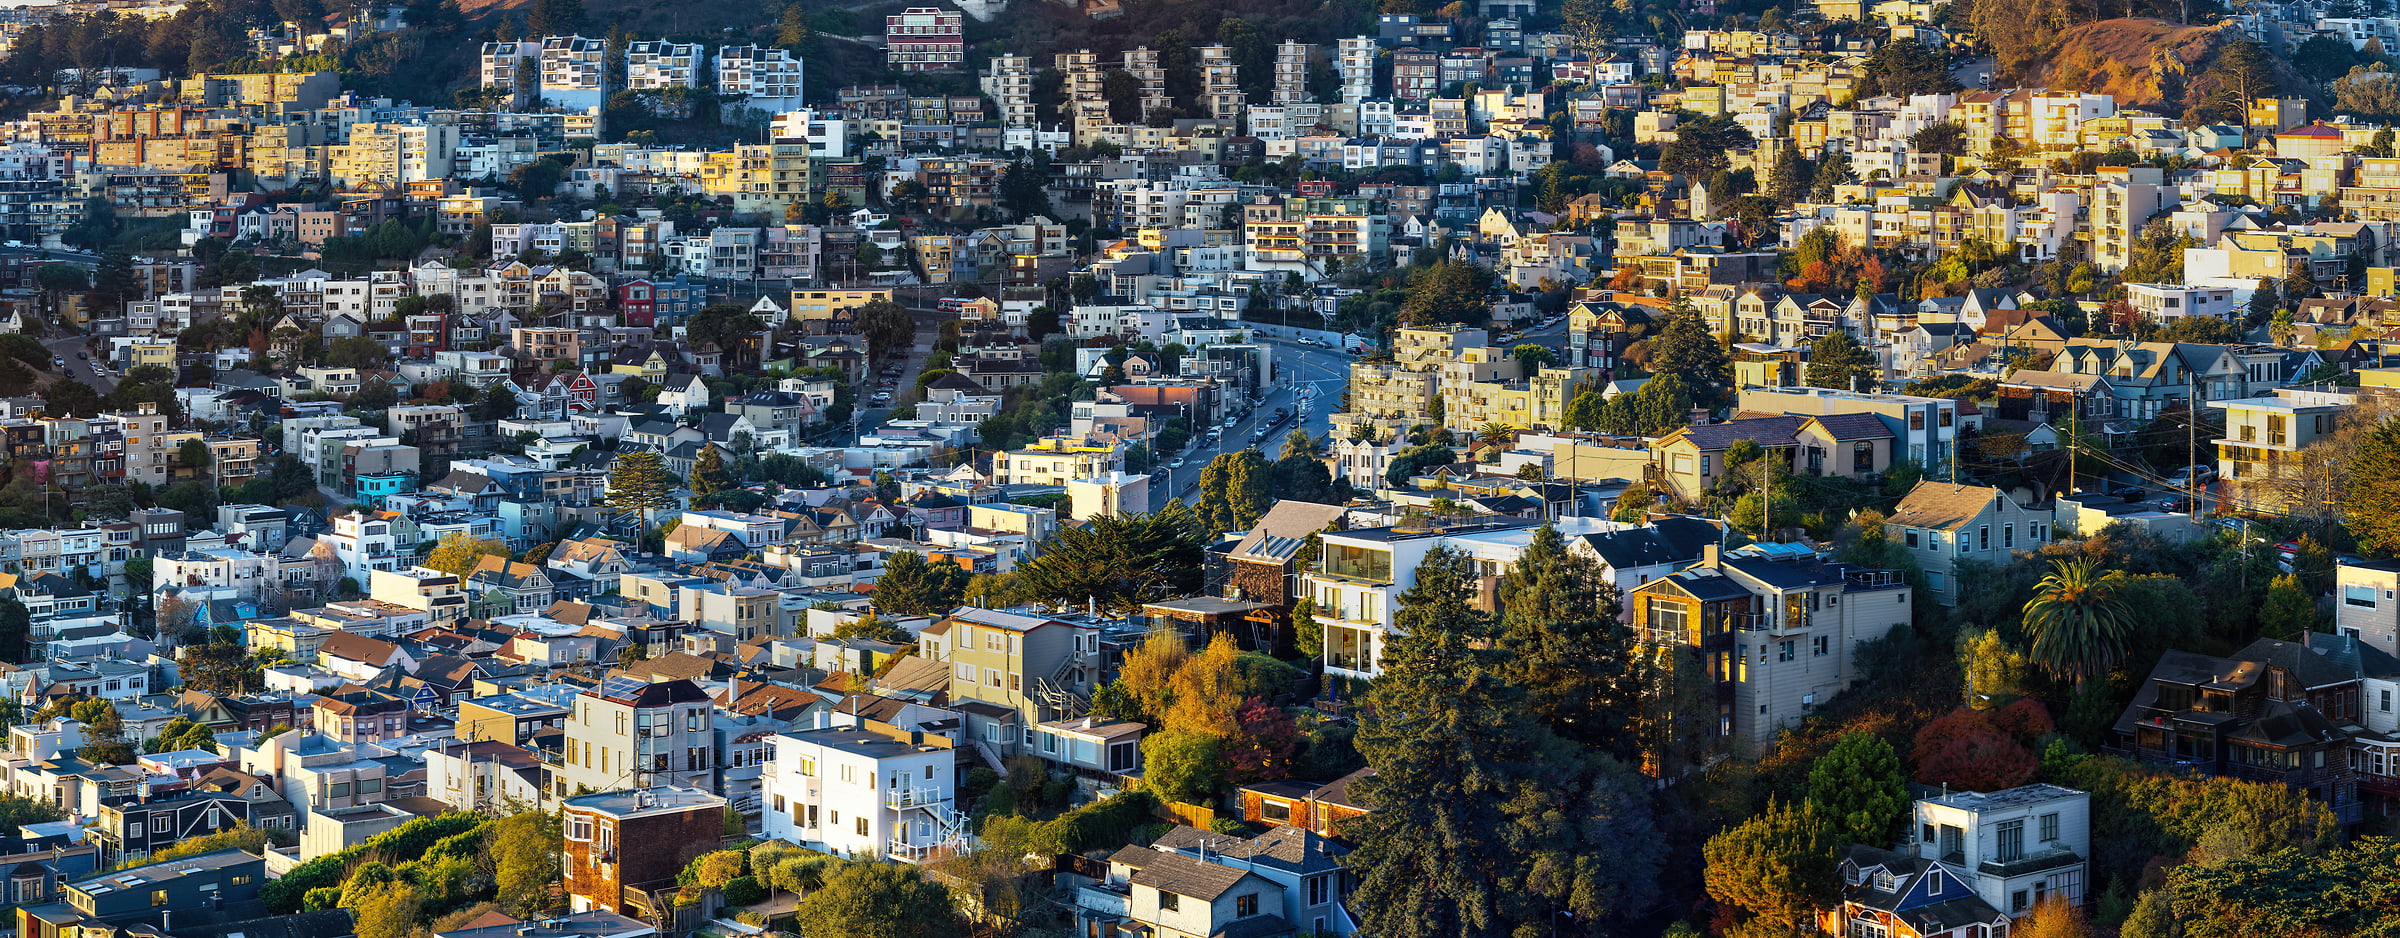 1,587 megapixels! A very high resolution, large-format VAST photo print of houses on a hillside at sunrise in Corona Heights, San Francisco; cityscape photograph created by Nicholas Gonzales.